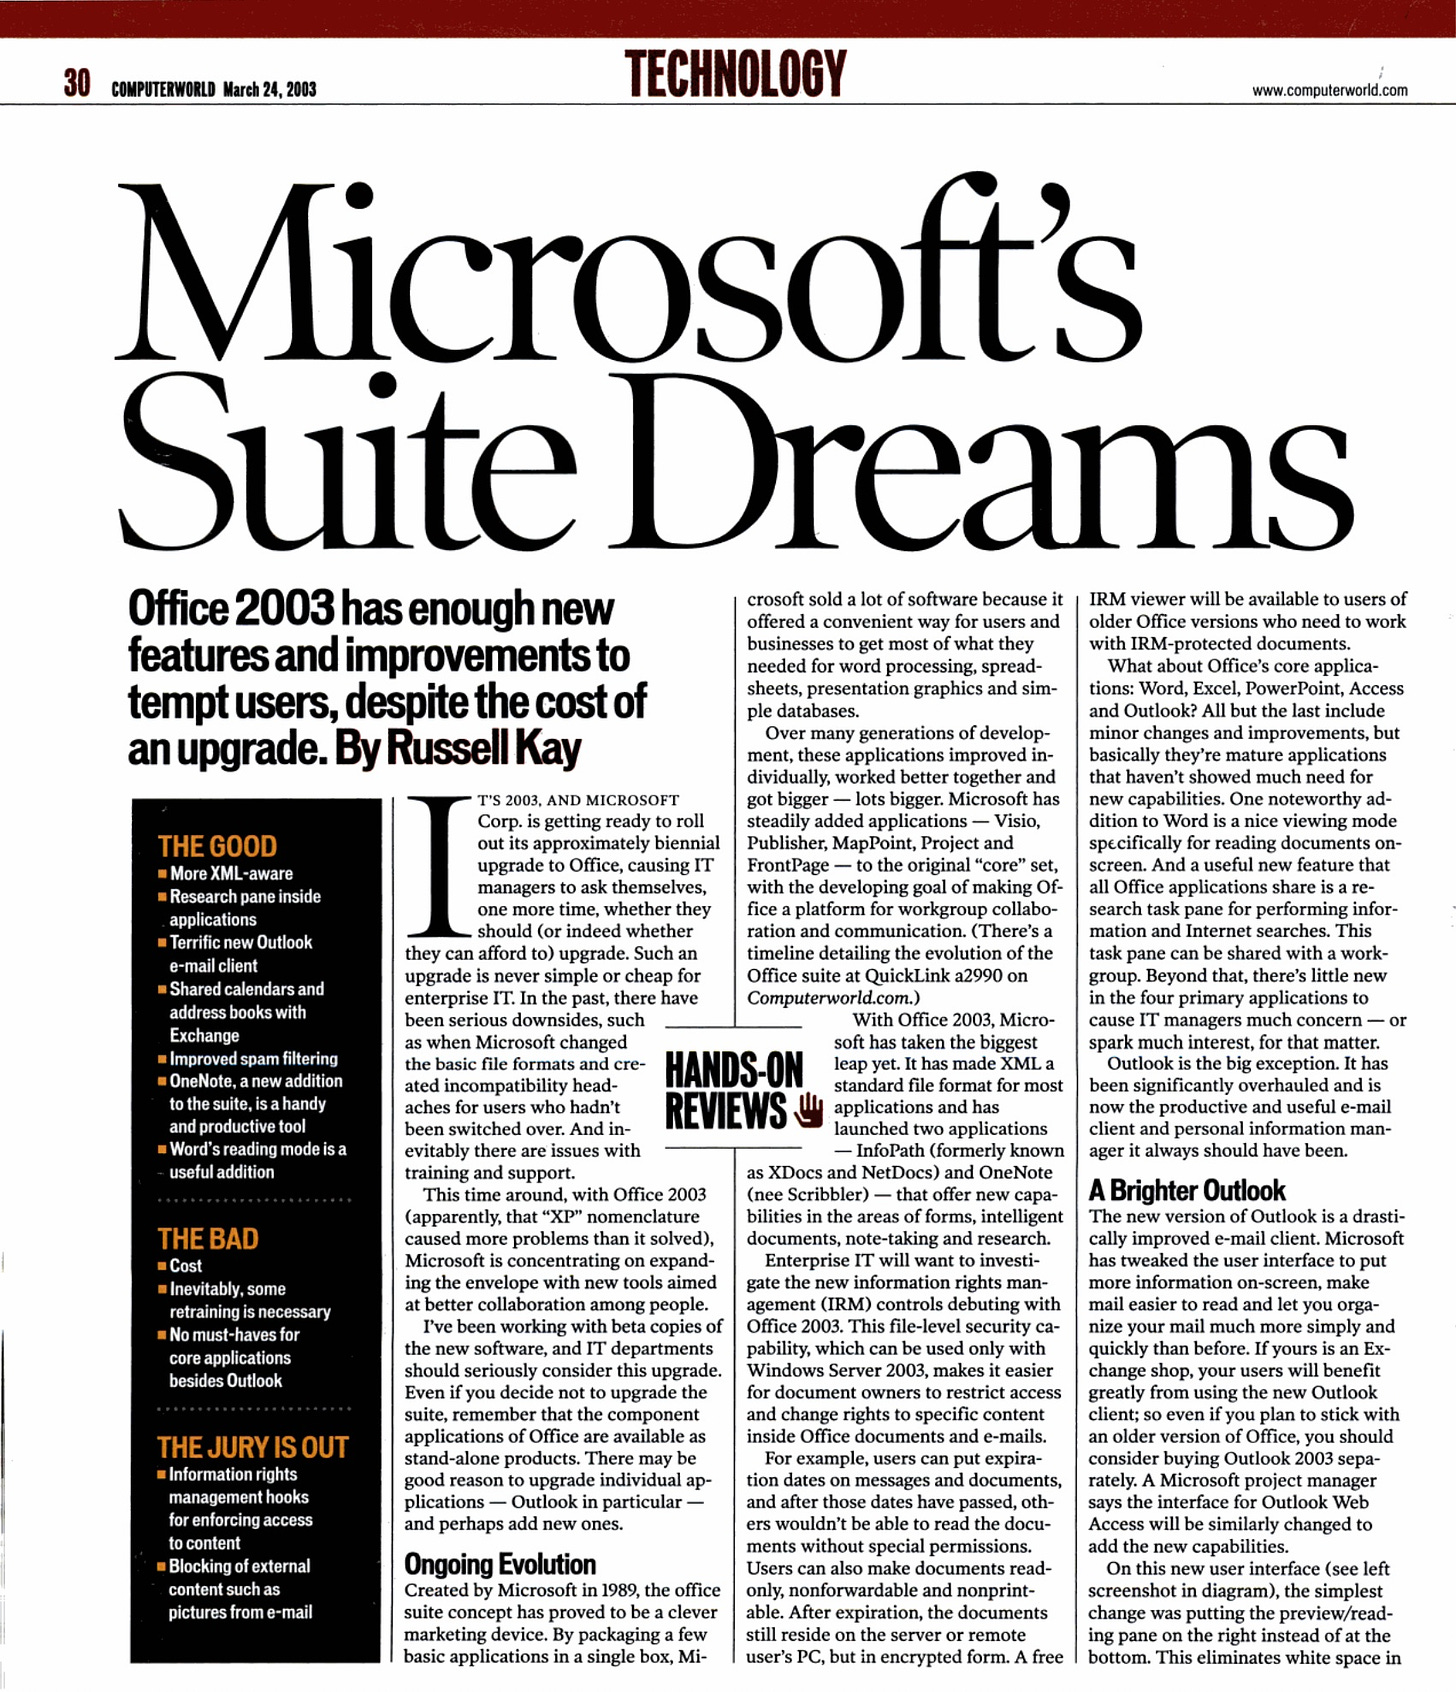 Microsoft's Suite Dreams Office 2003 has enough new features and improvements to tempt users, despite the cost of an upgrade. By Russell Kay THE GOOD -More XML-aware -Research pane inside applications - Terrific new Outlook e-mail client - Shared calendars and address books with Exchange = Improved spam filtering #OneNote, a new addition to the suite, is a handy and productive tool -Word's reading mode is a - useful addition THE BAD -Cost Inevitably, some retraining is necessary -No must-haves for core applications besides Outlook THE JURY IS OUT - Information rights management hooks for enforcing access to content - Blocking of external content such as pictures from e-mail